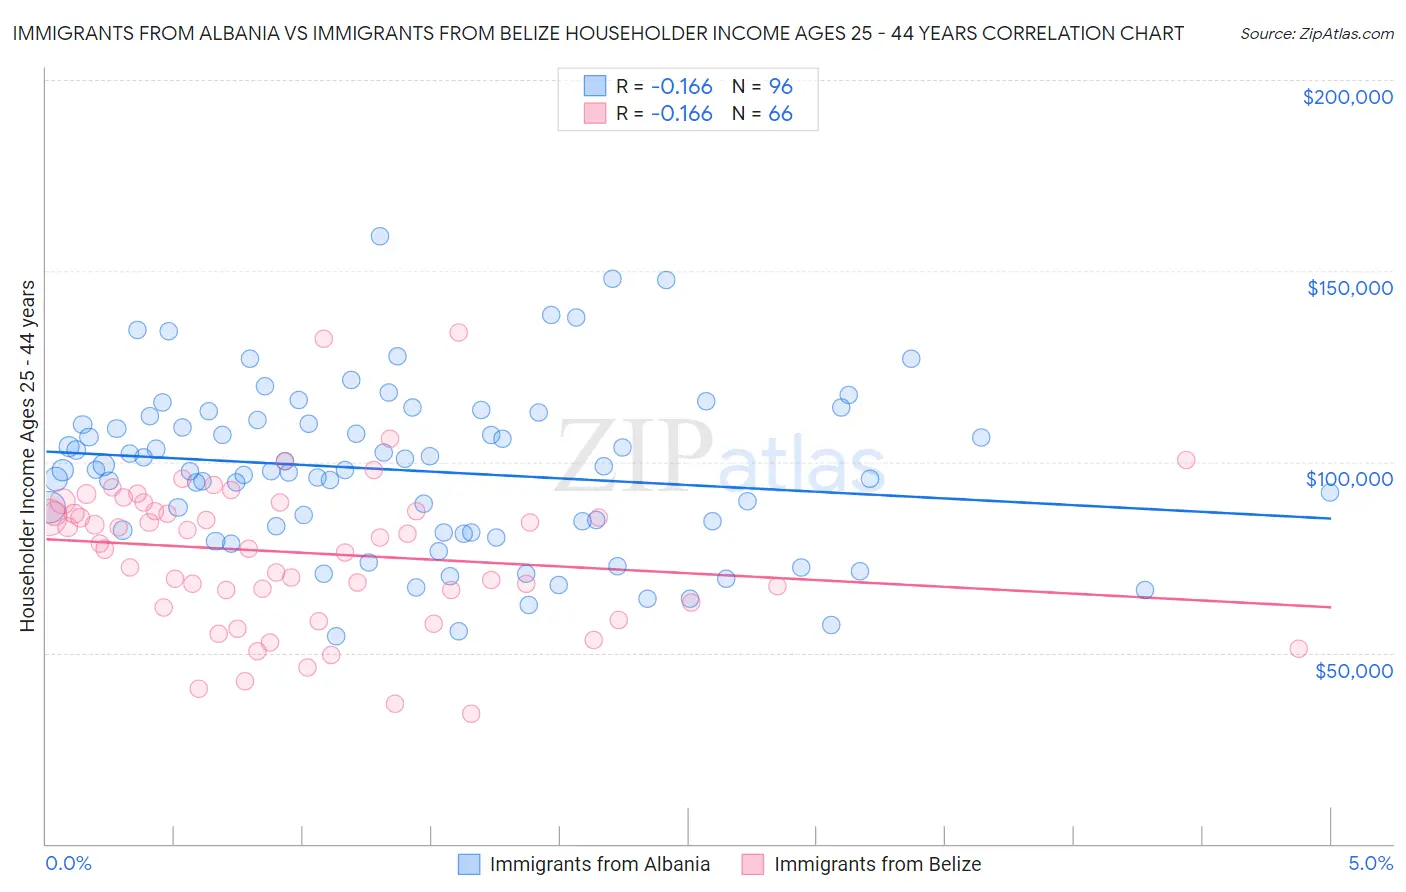 Immigrants from Albania vs Immigrants from Belize Householder Income Ages 25 - 44 years